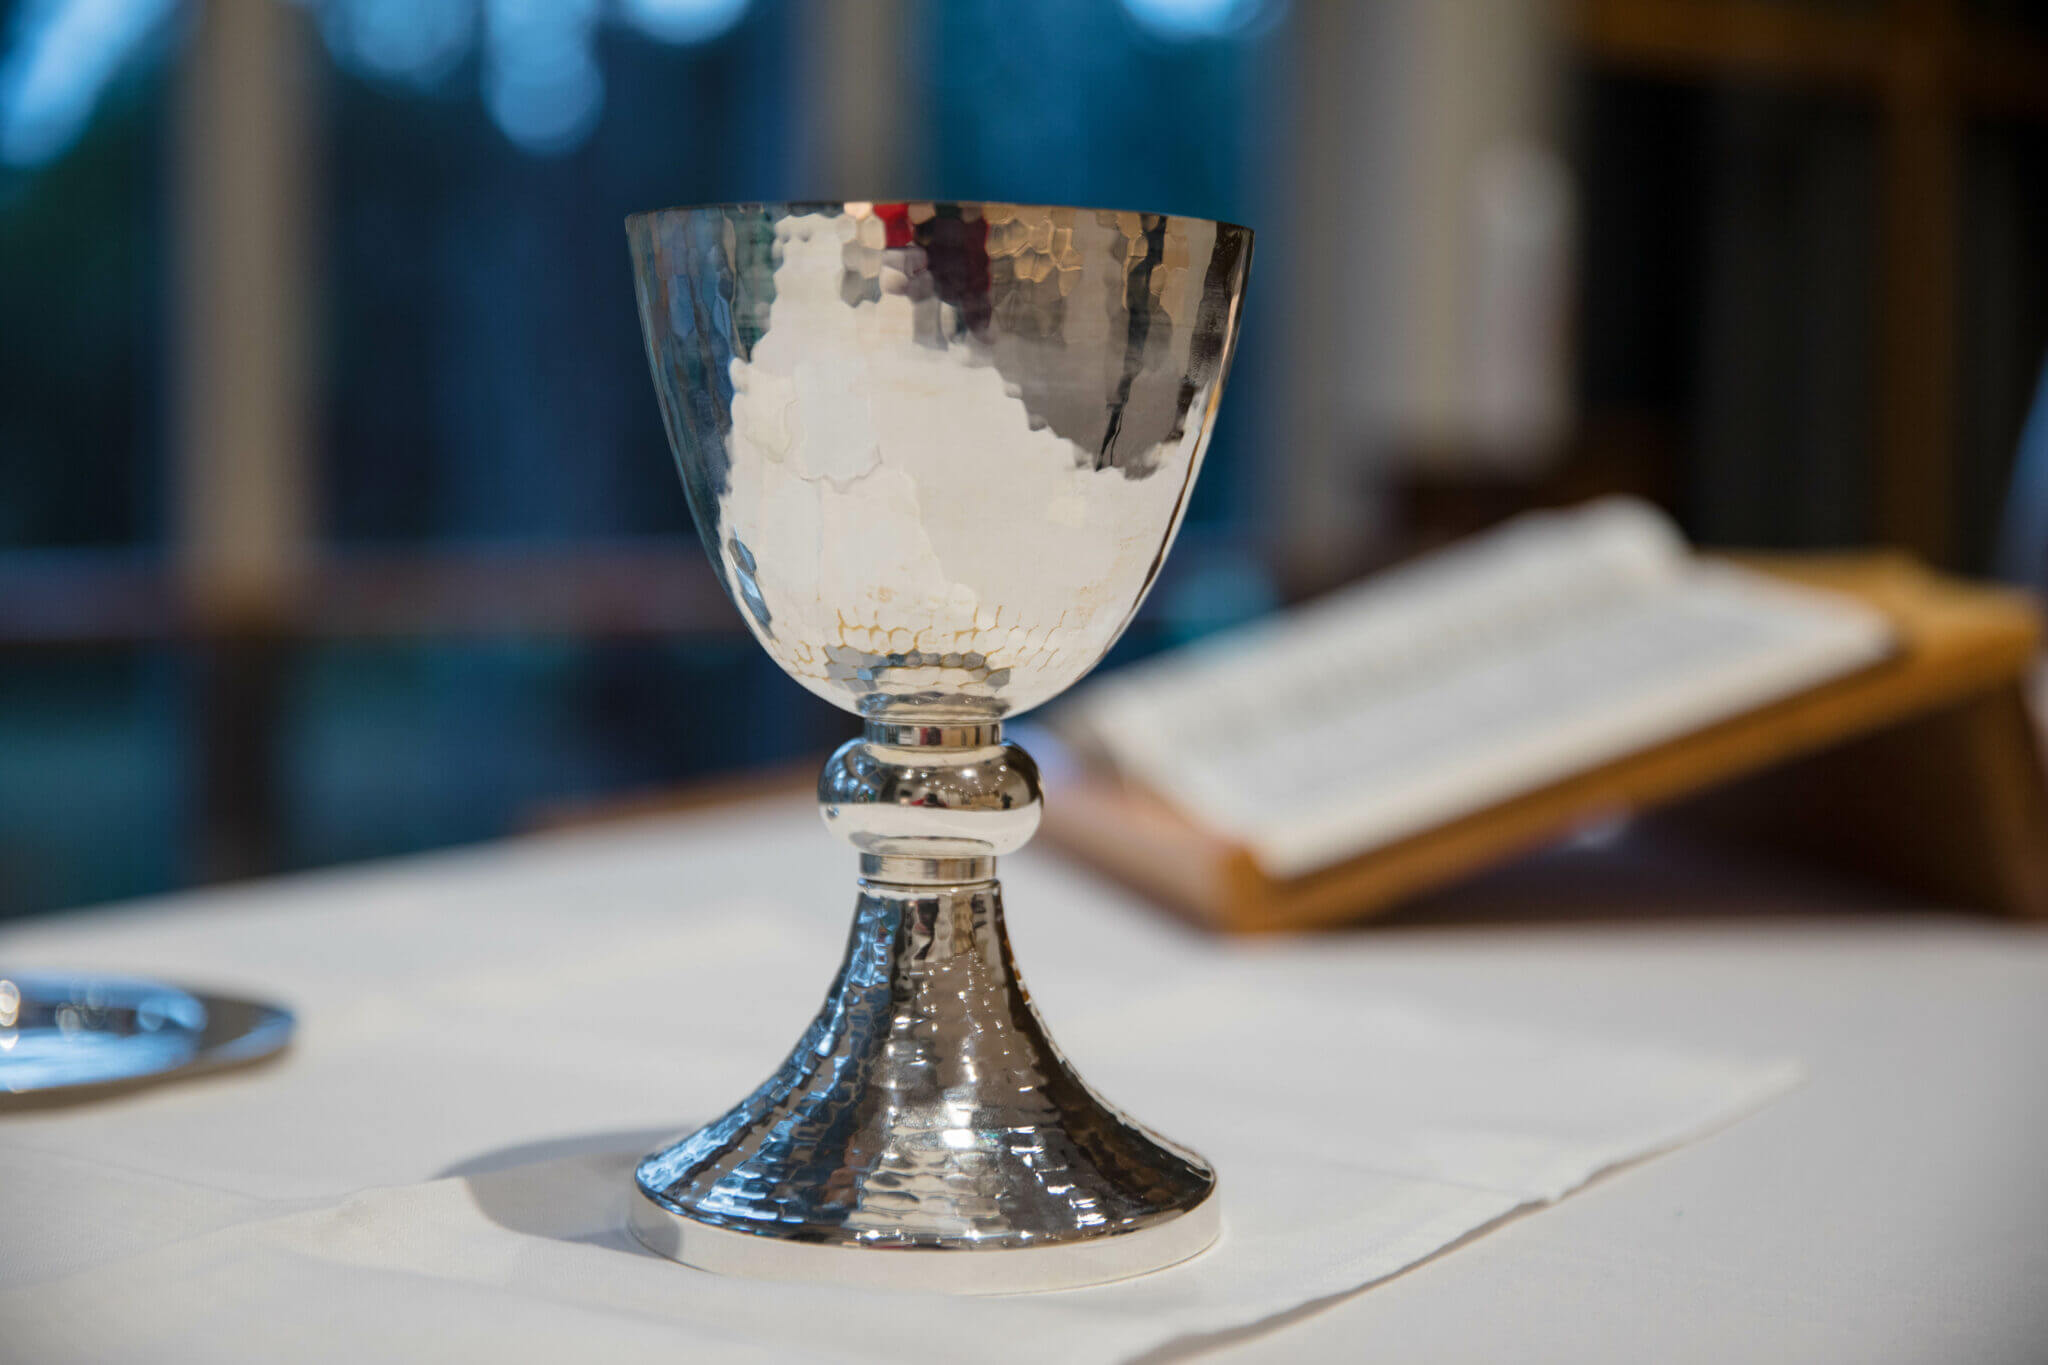 Chalice on the altar